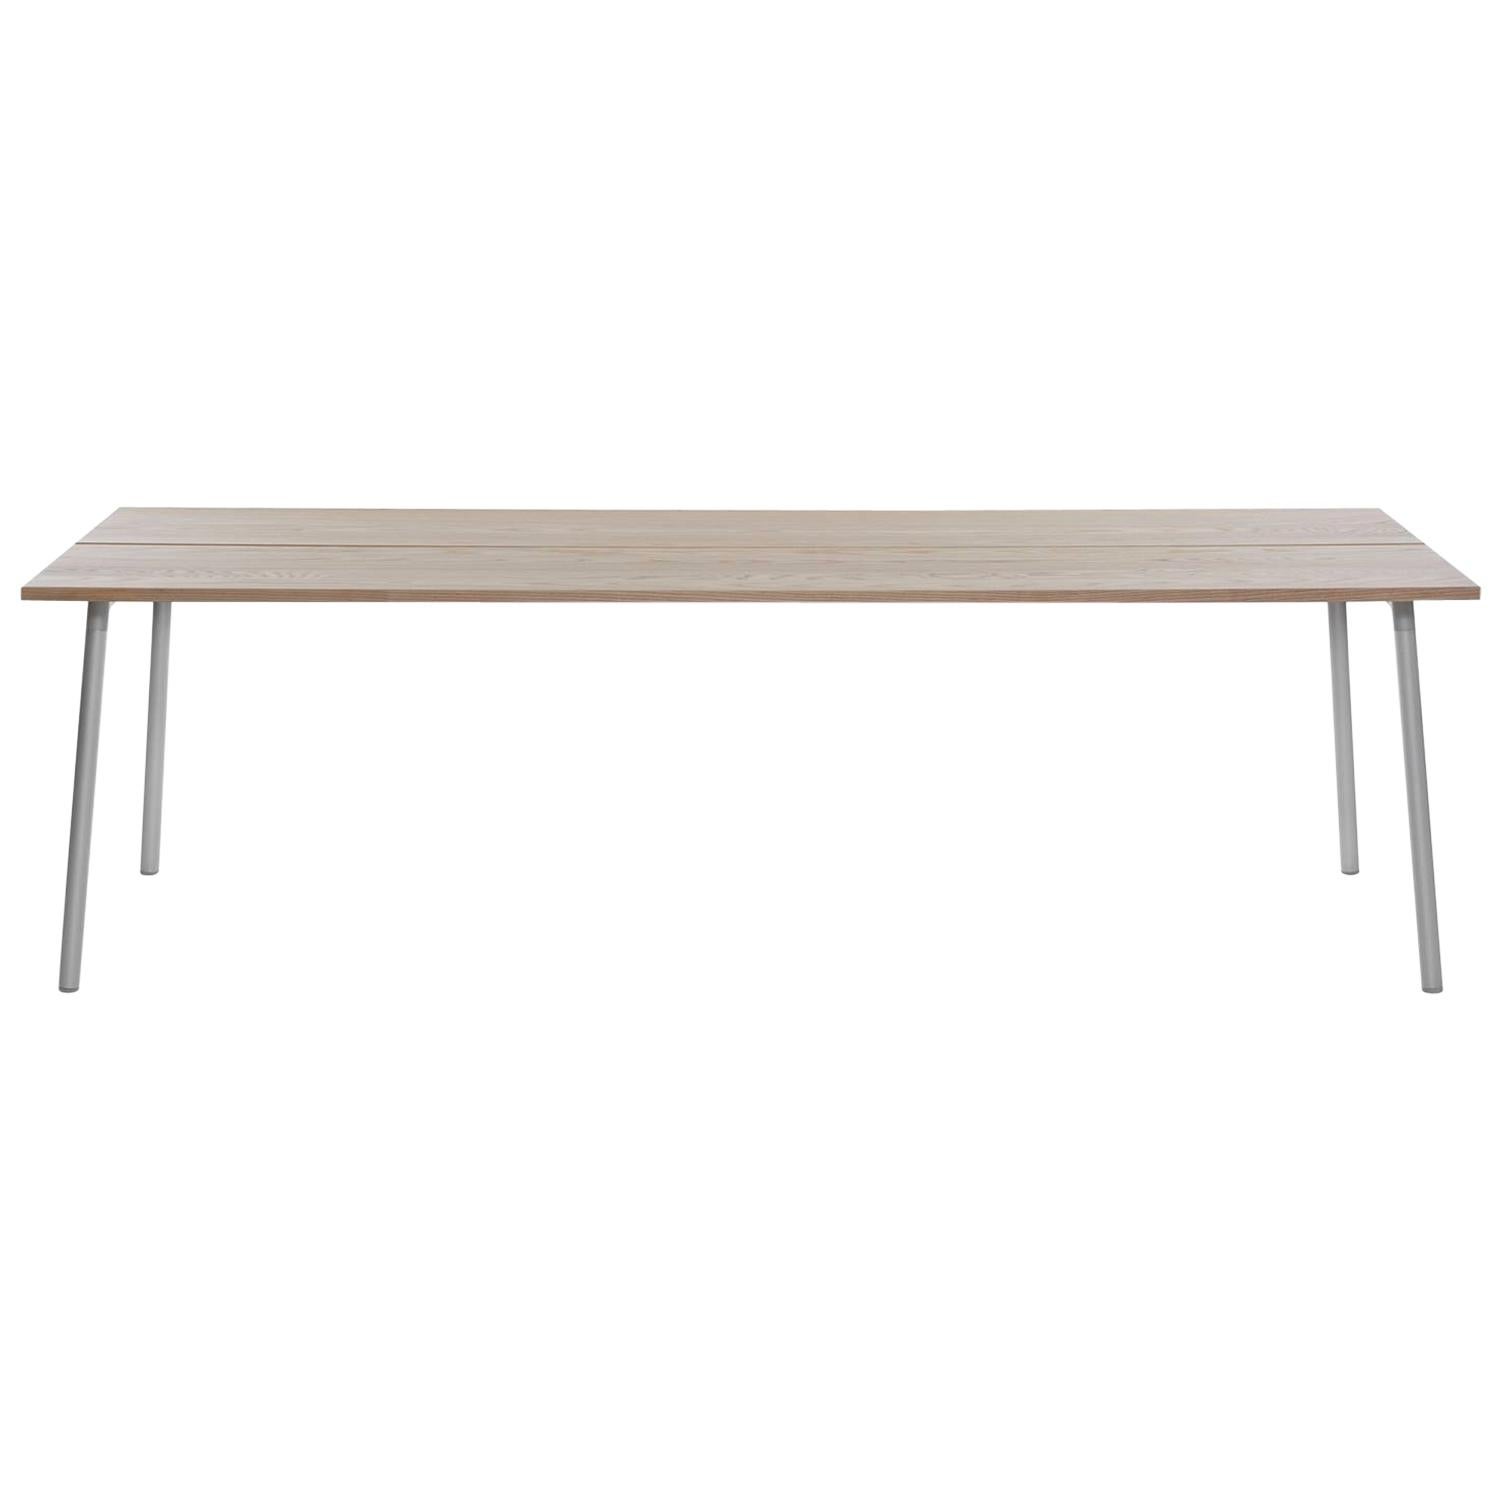 Emeco Run Extra Large Table in Aluminum and Ash by Sam Hecht + Kim Colin For Sale